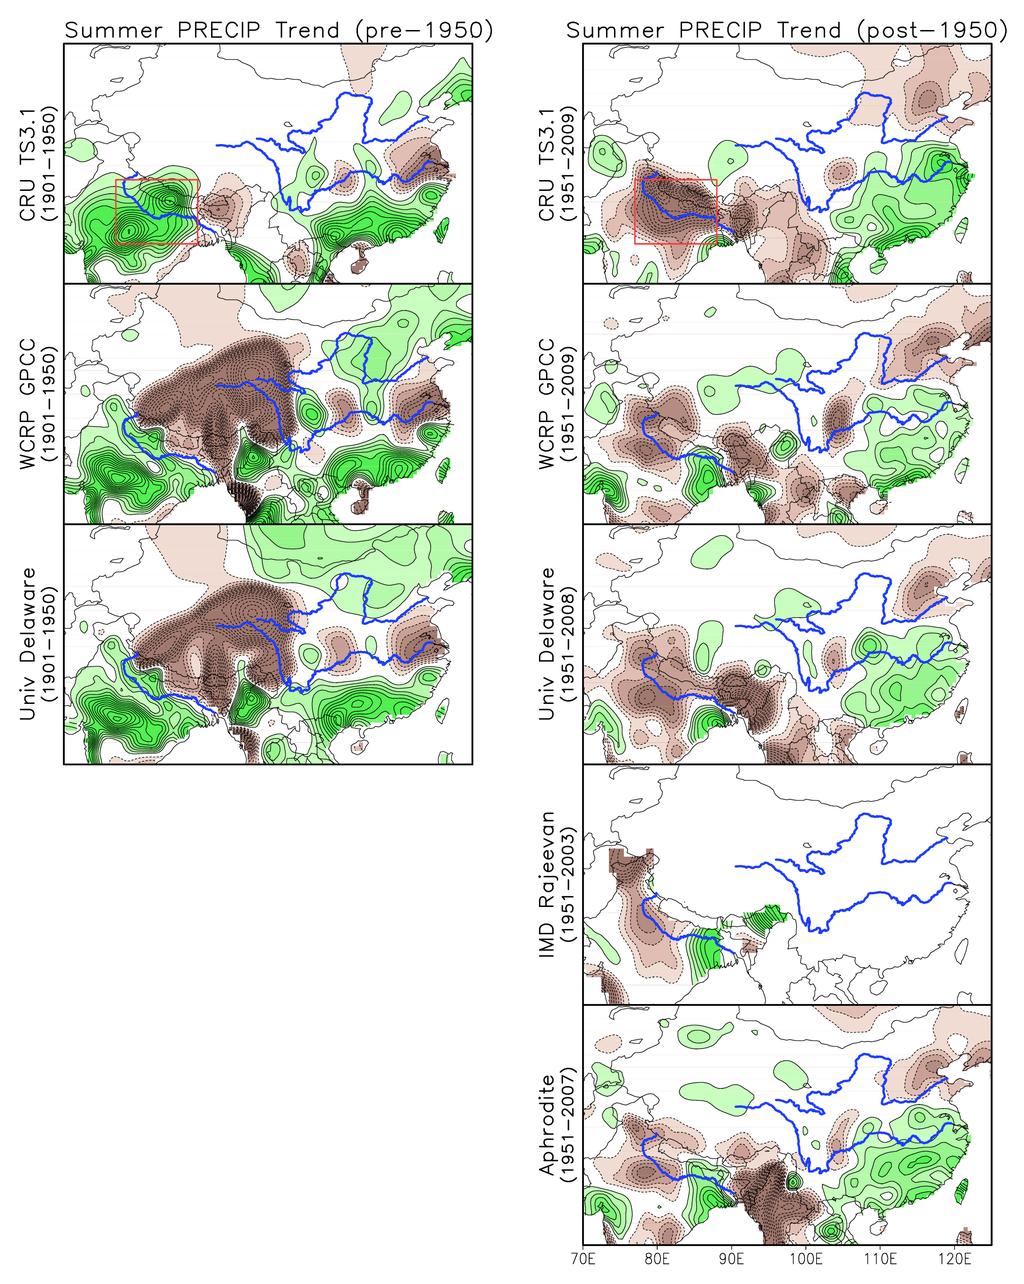 Changes of S. Asia and E. Asia summer rainfall Linear trend in summer rainfall in the post--1950 period is plotted at 0.5 mm/day/century interval in the 0.5 resolution CRU TS 3.